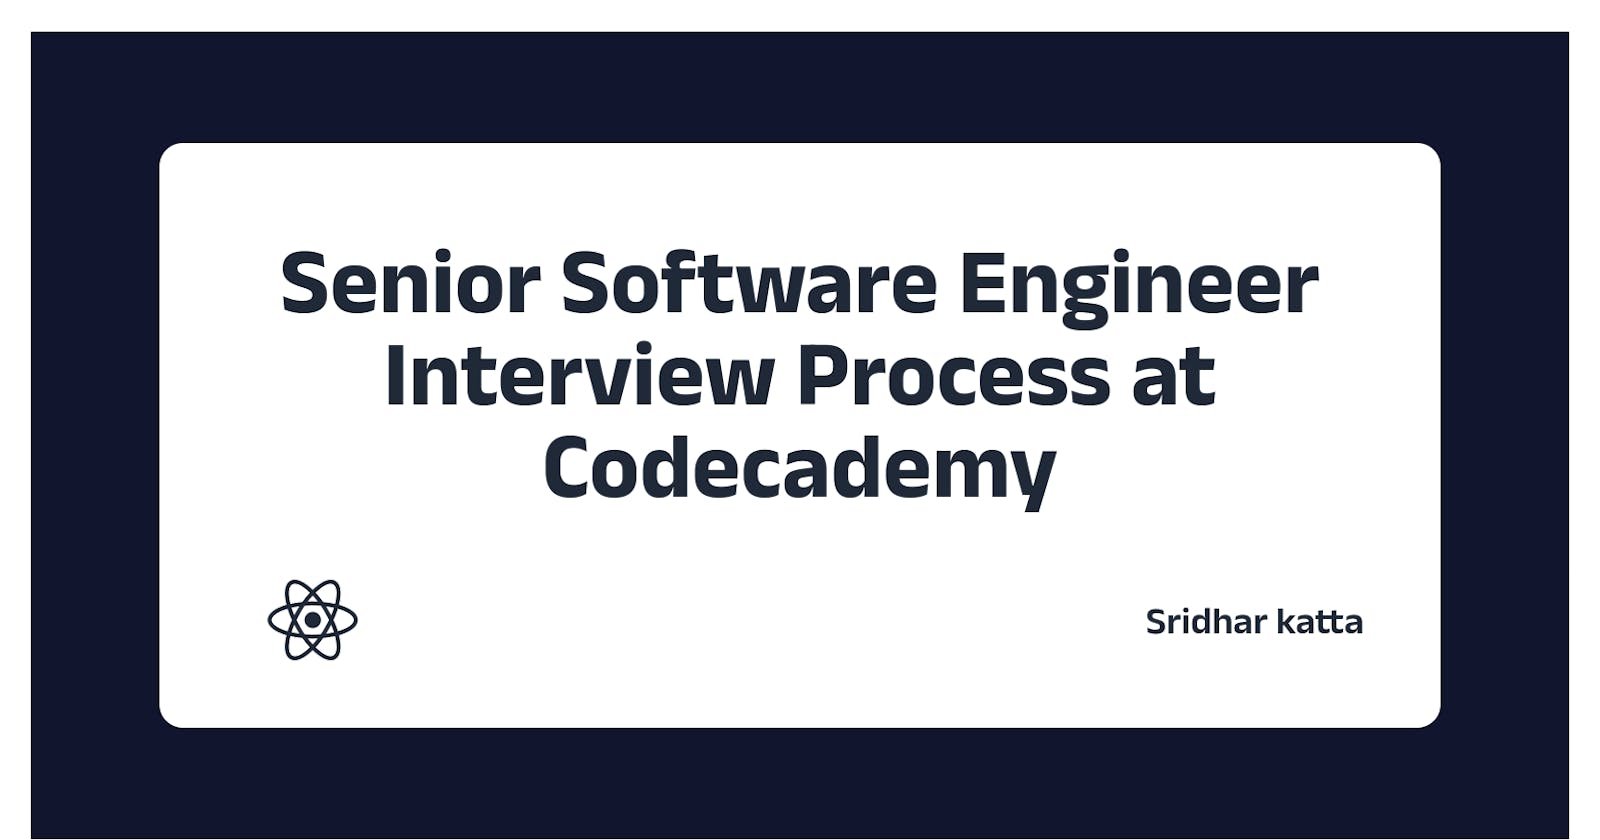 Cracking the Code: My Senior Software Engineer Interview Experience at Codecademy